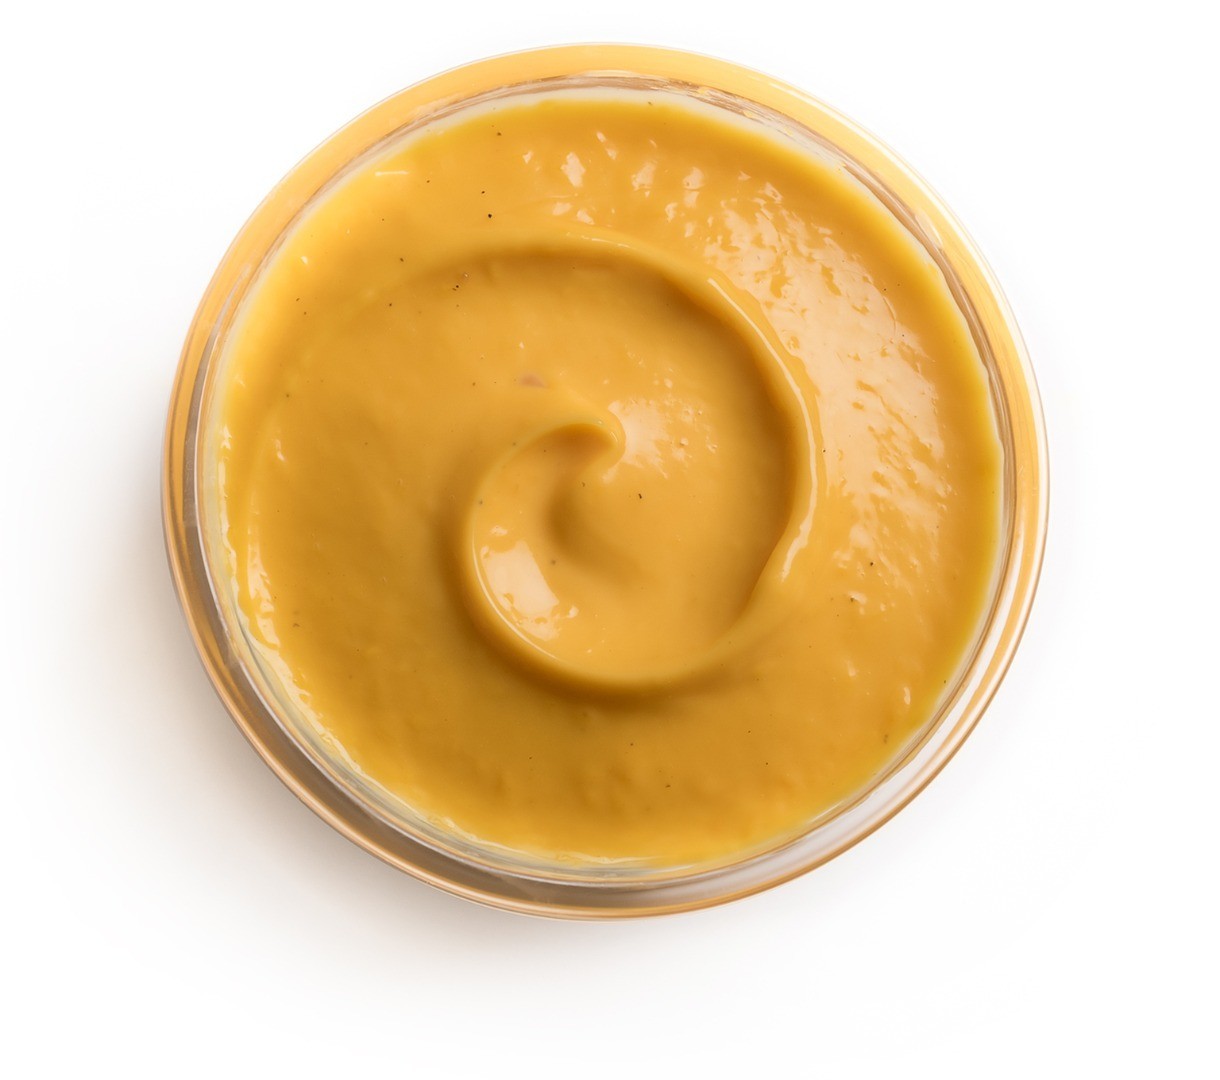 Cheddar Cheese Based Sauce